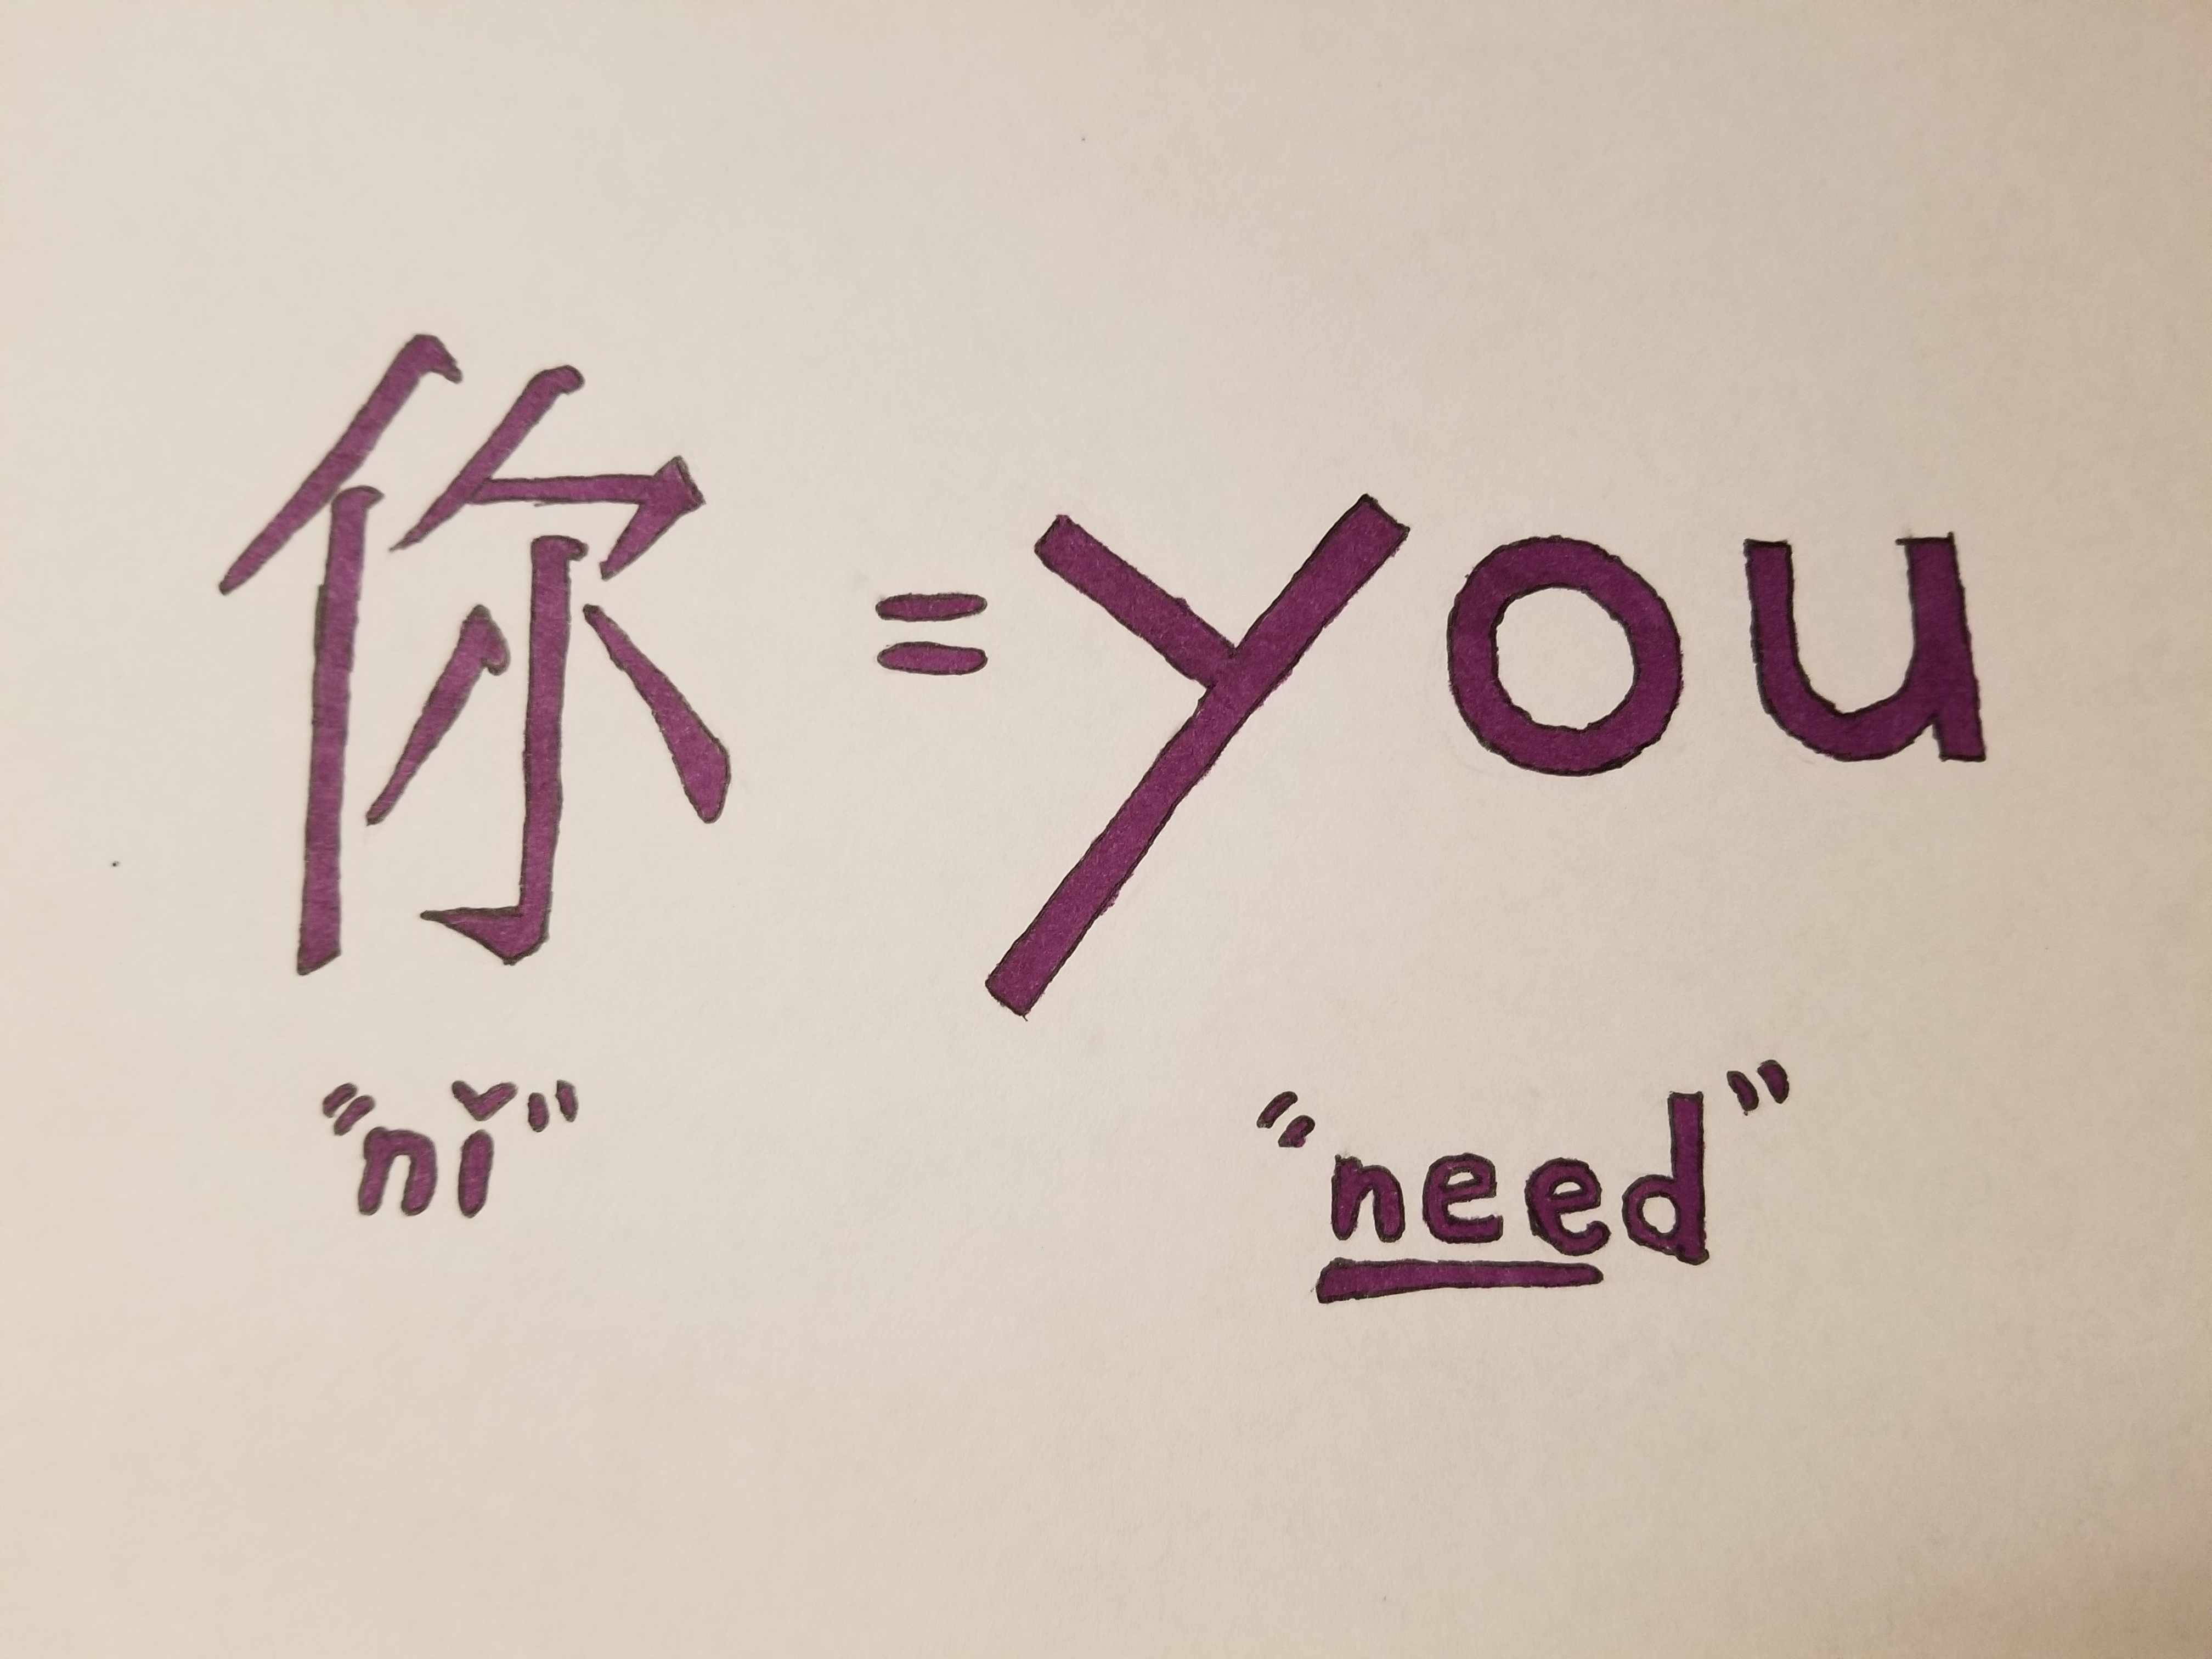 Learn Chinese with stupid puns - you